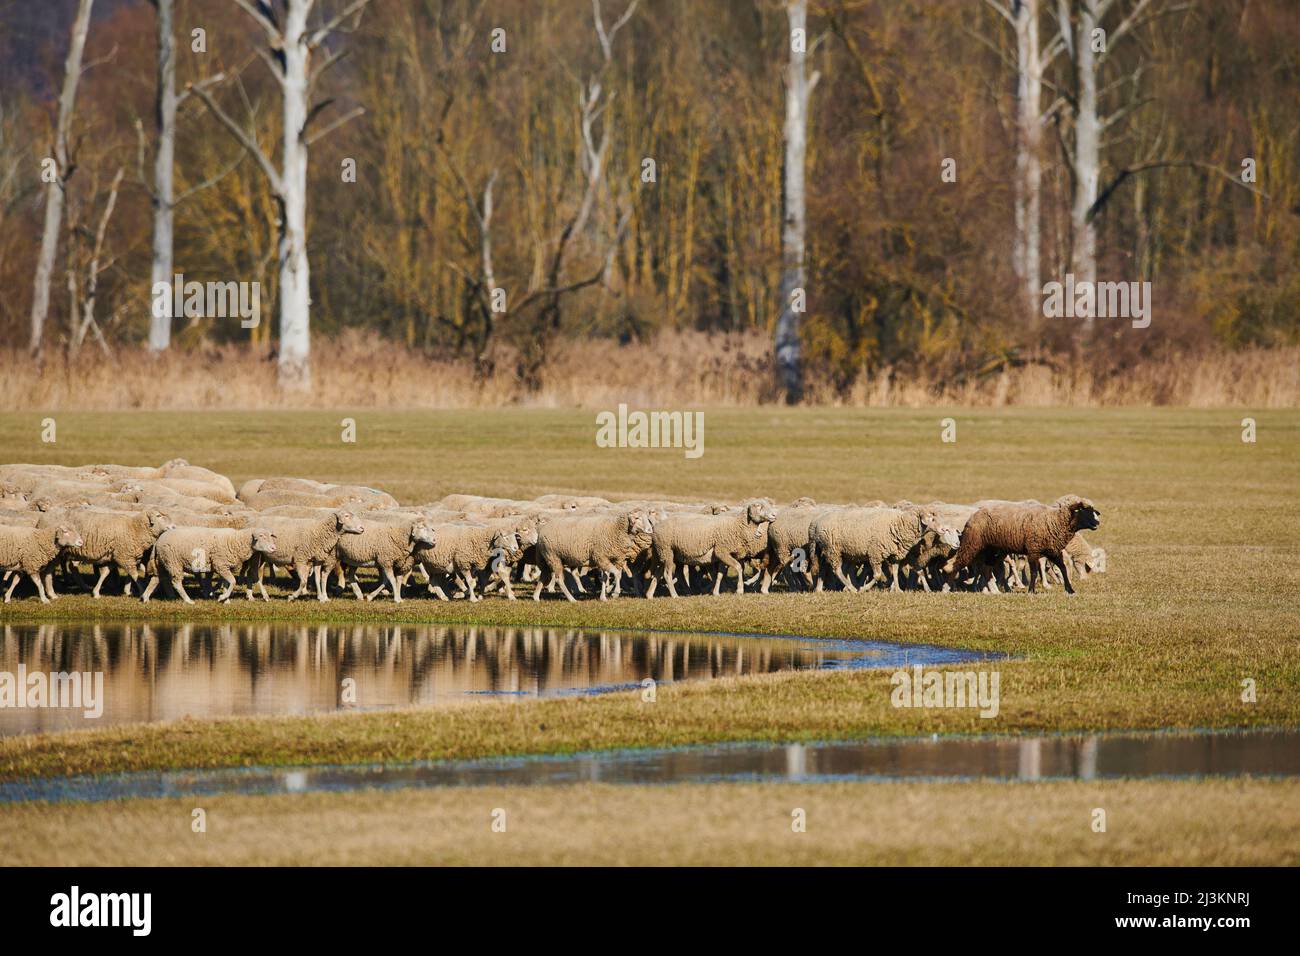 A brown sheep (Ovis aries) leading the flock walking on a meadow with water puddles; Upper Palatinate, Bavaria, Germany Stock Photo